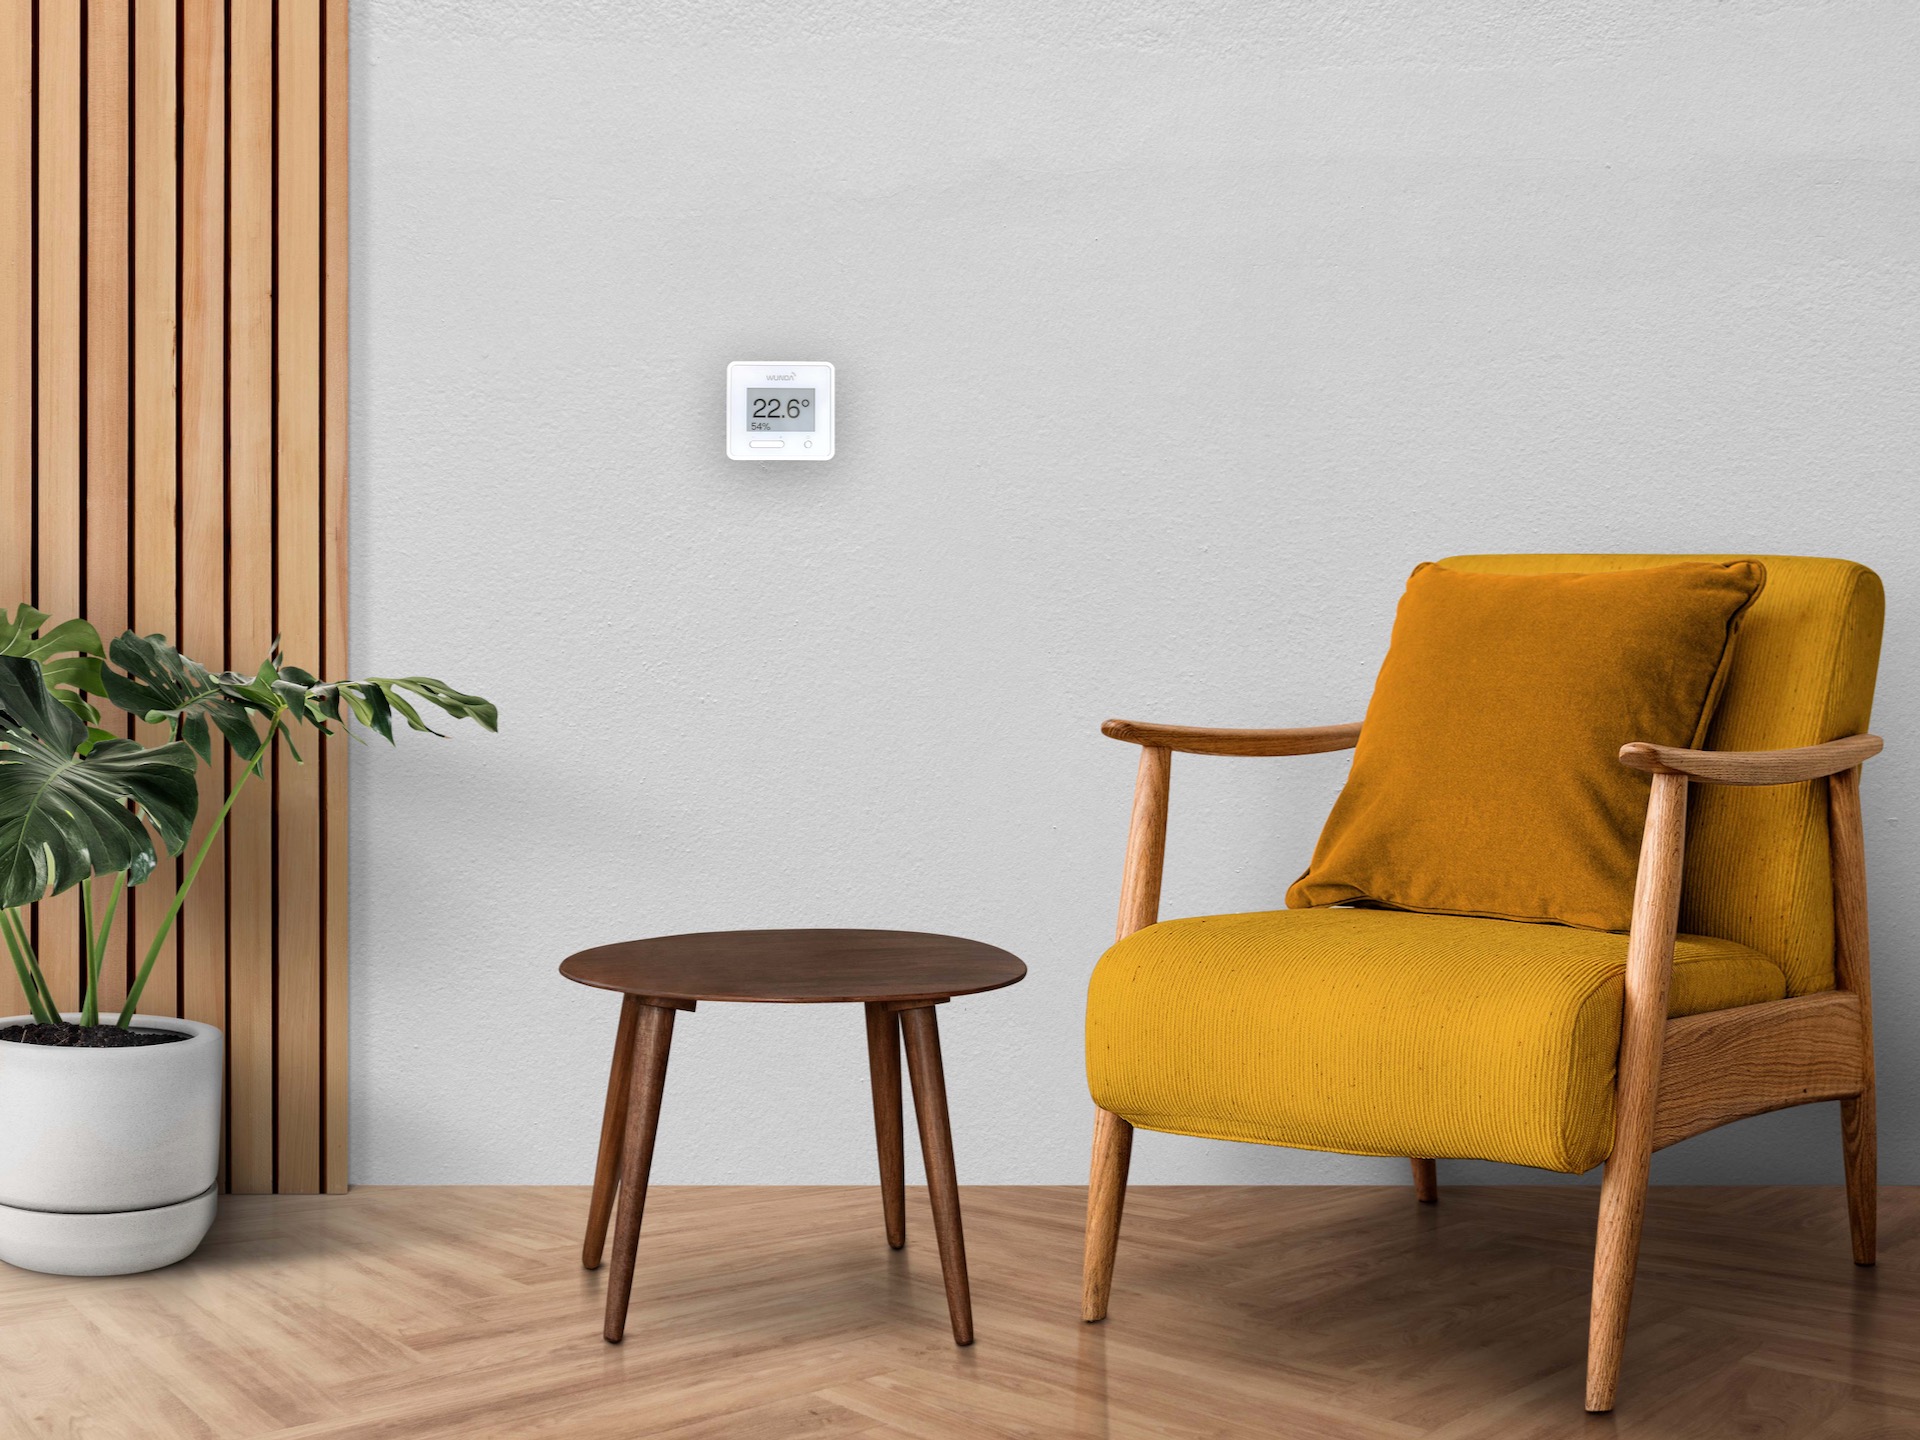 Living room with grey wall, mustard chair and thermostat